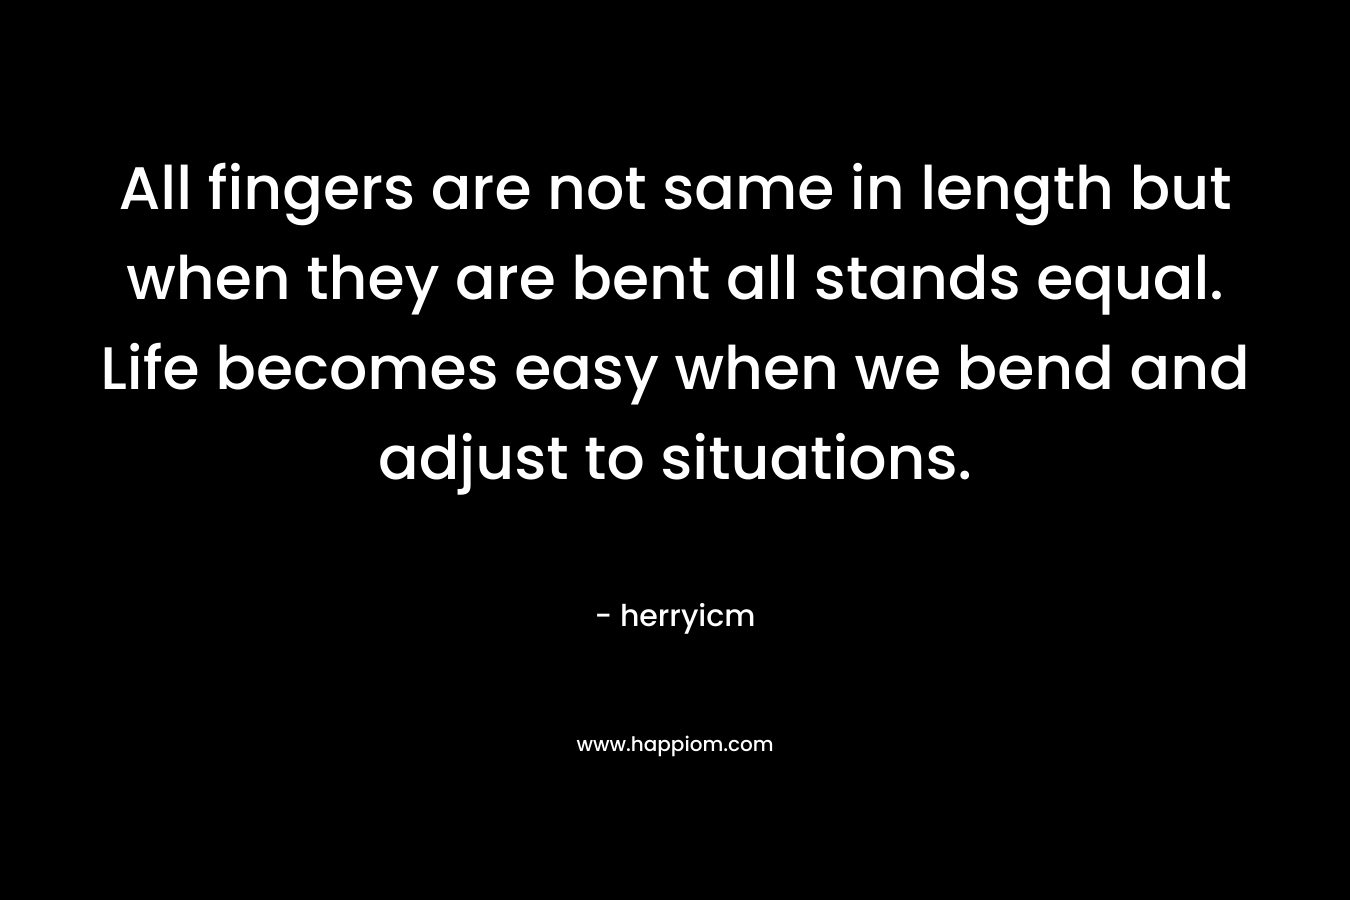 All fingers are not same in length but when they are bent all stands equal. Life becomes easy when we bend and adjust to situations. – herryicm